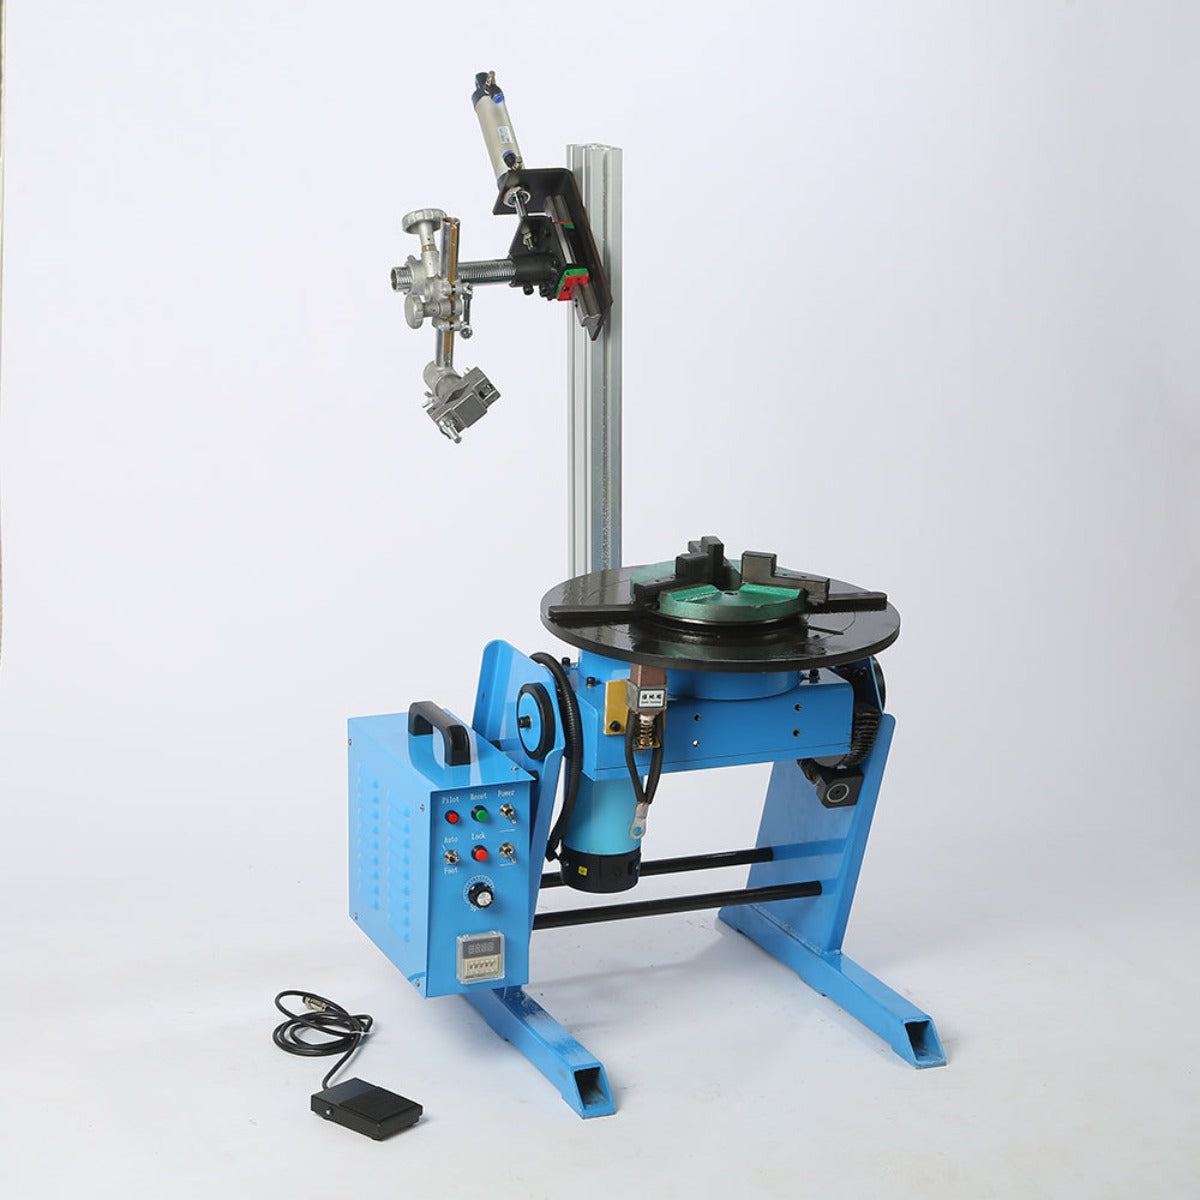 Enhance Precision with JINSLU: 50KG Horizontal Welding Positioner Turntable for Pipe Welding - Includes Welding Chuck (Customized products, please contact us to buy, EMAIL: sales@jinslu.com)